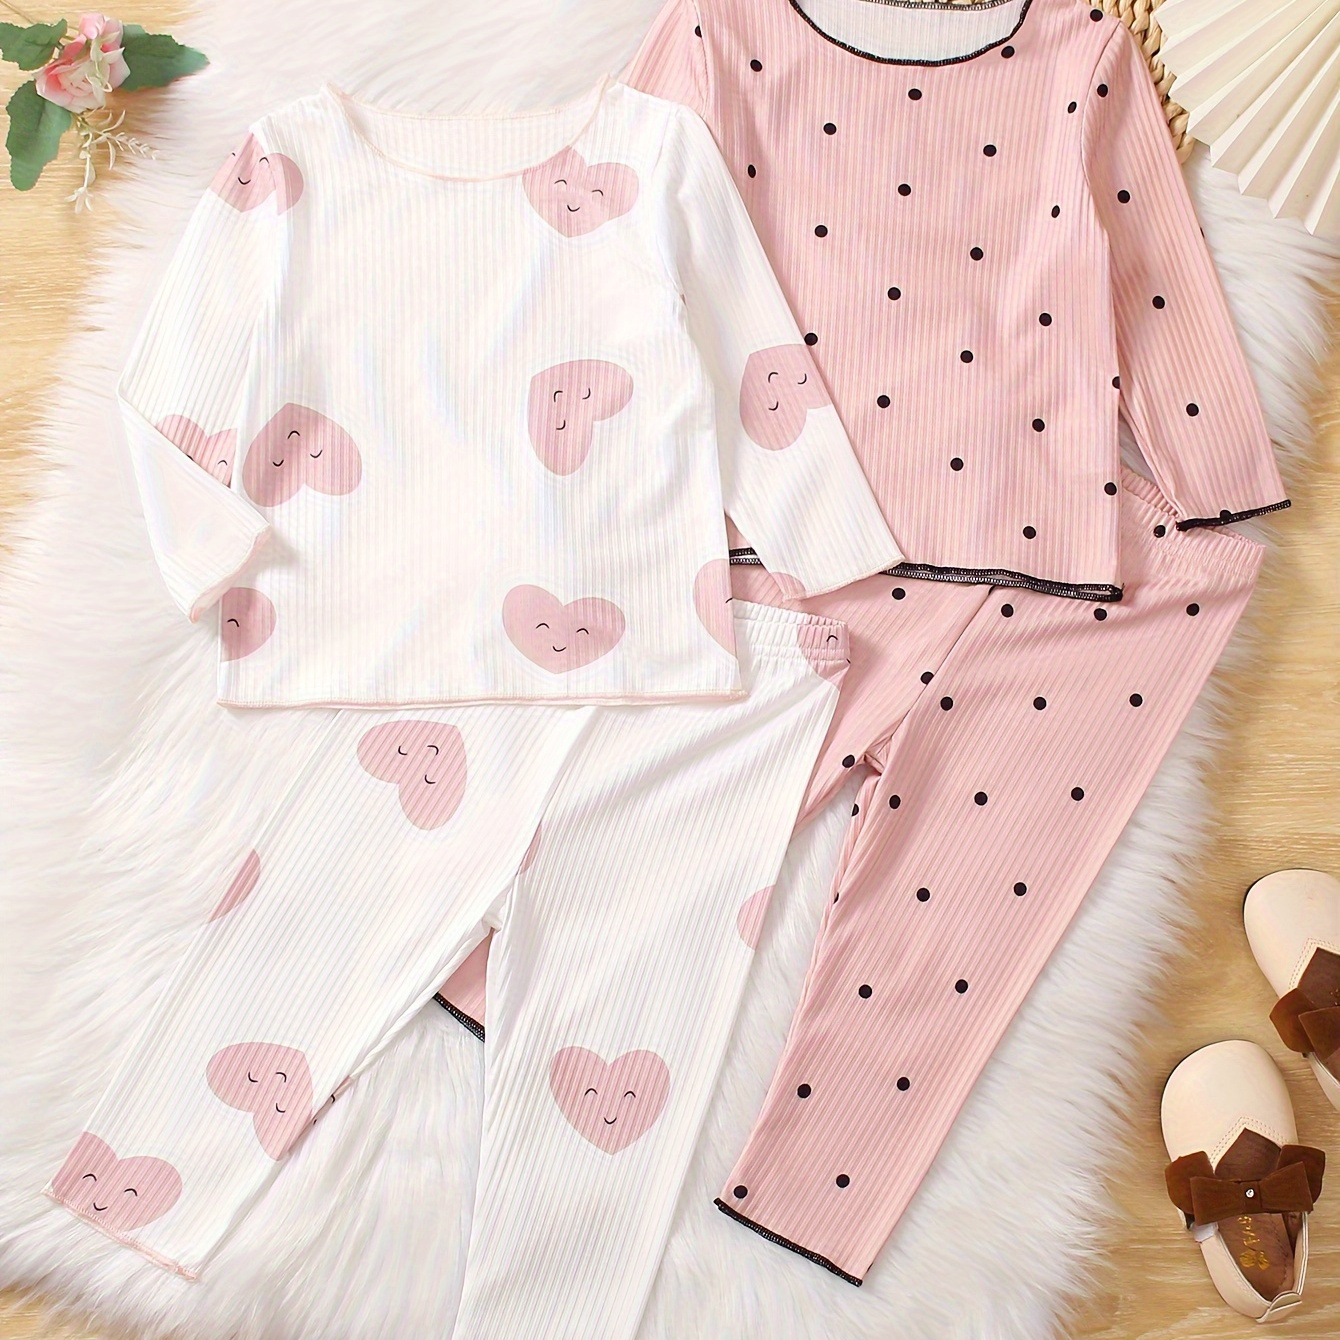 

2 Sets Baby's Cartoon Heart & Polka Dots Pattern Long Sleeve Top + Comfy Ribbed Pants, Toddler & Infant Girl's Clothing Set For Spring Summer